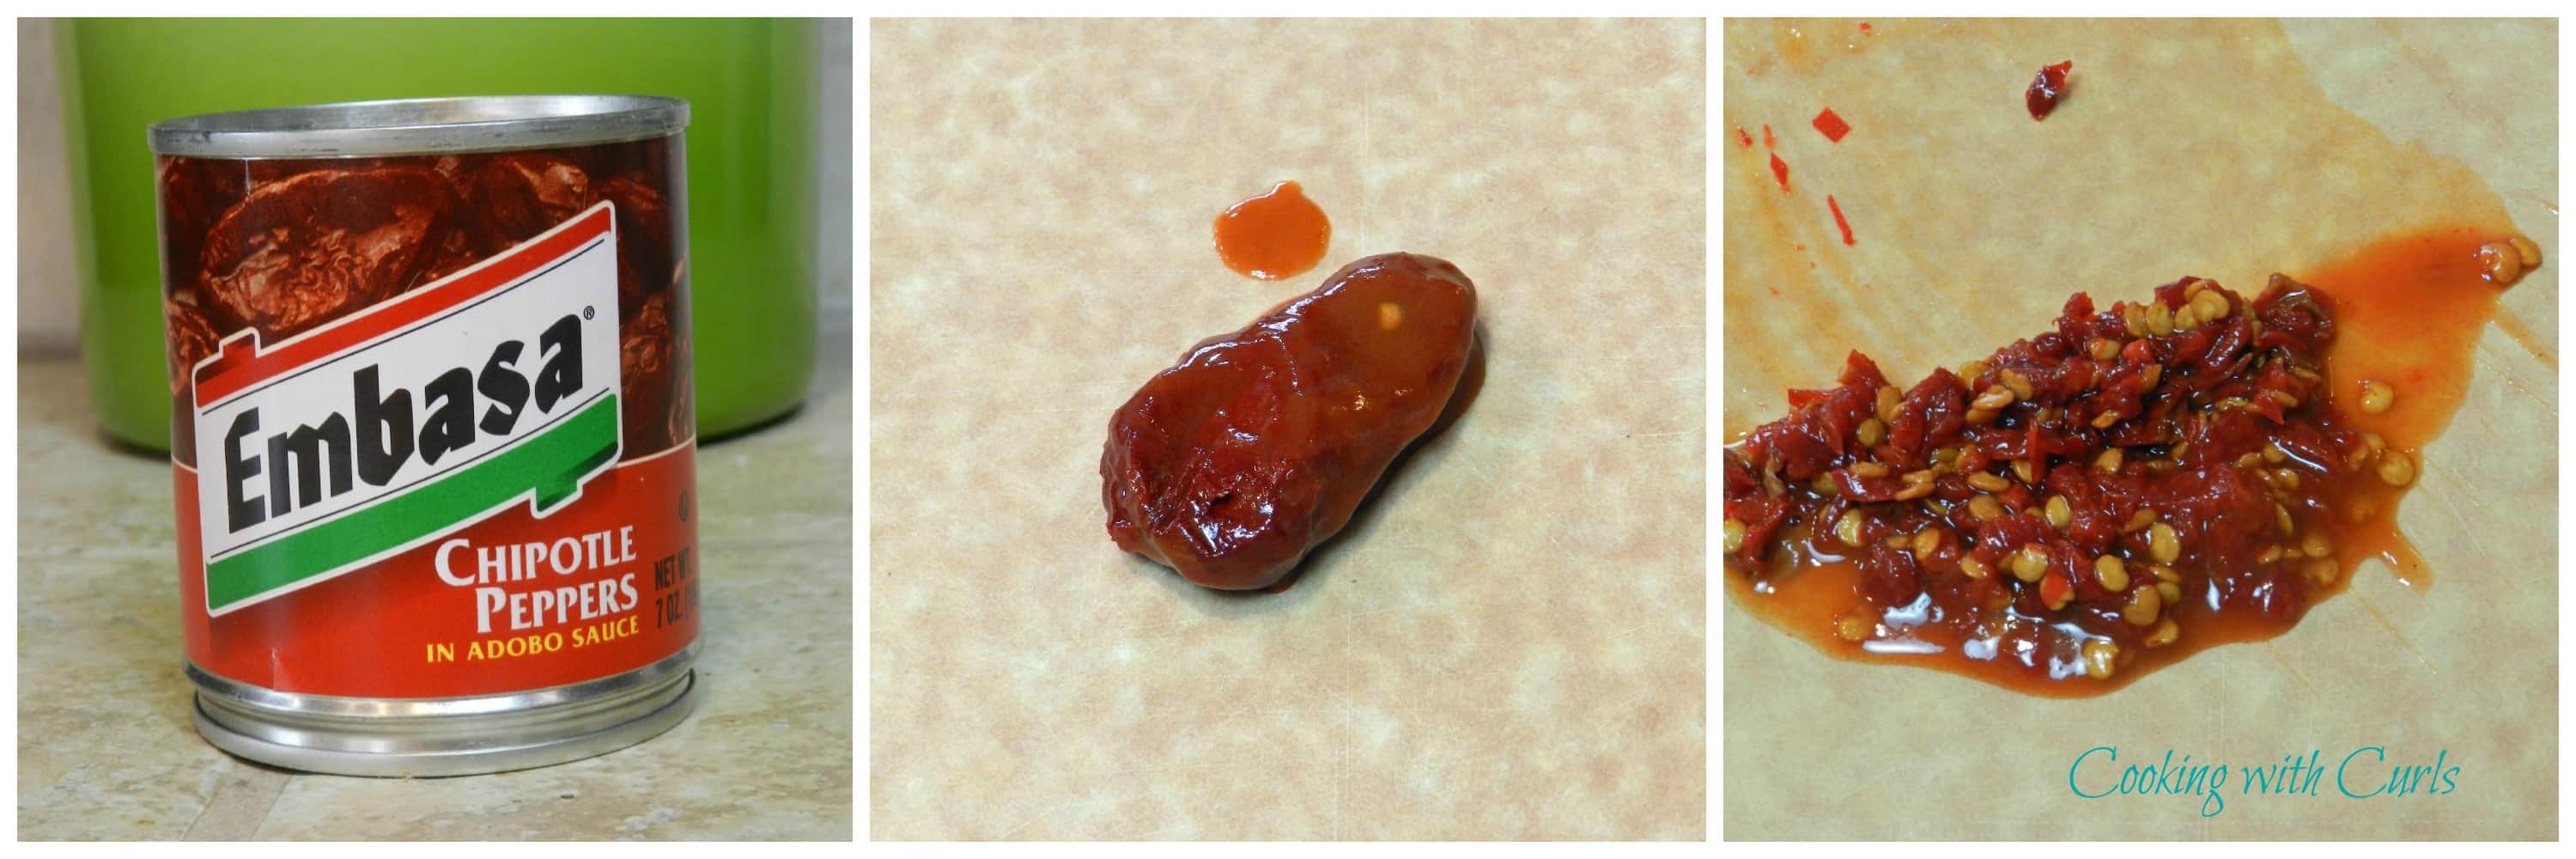 Photo collage showing a can of chipotle peppers in adobo sauce, a chipotle pepper, and the sauce on a cutting board.